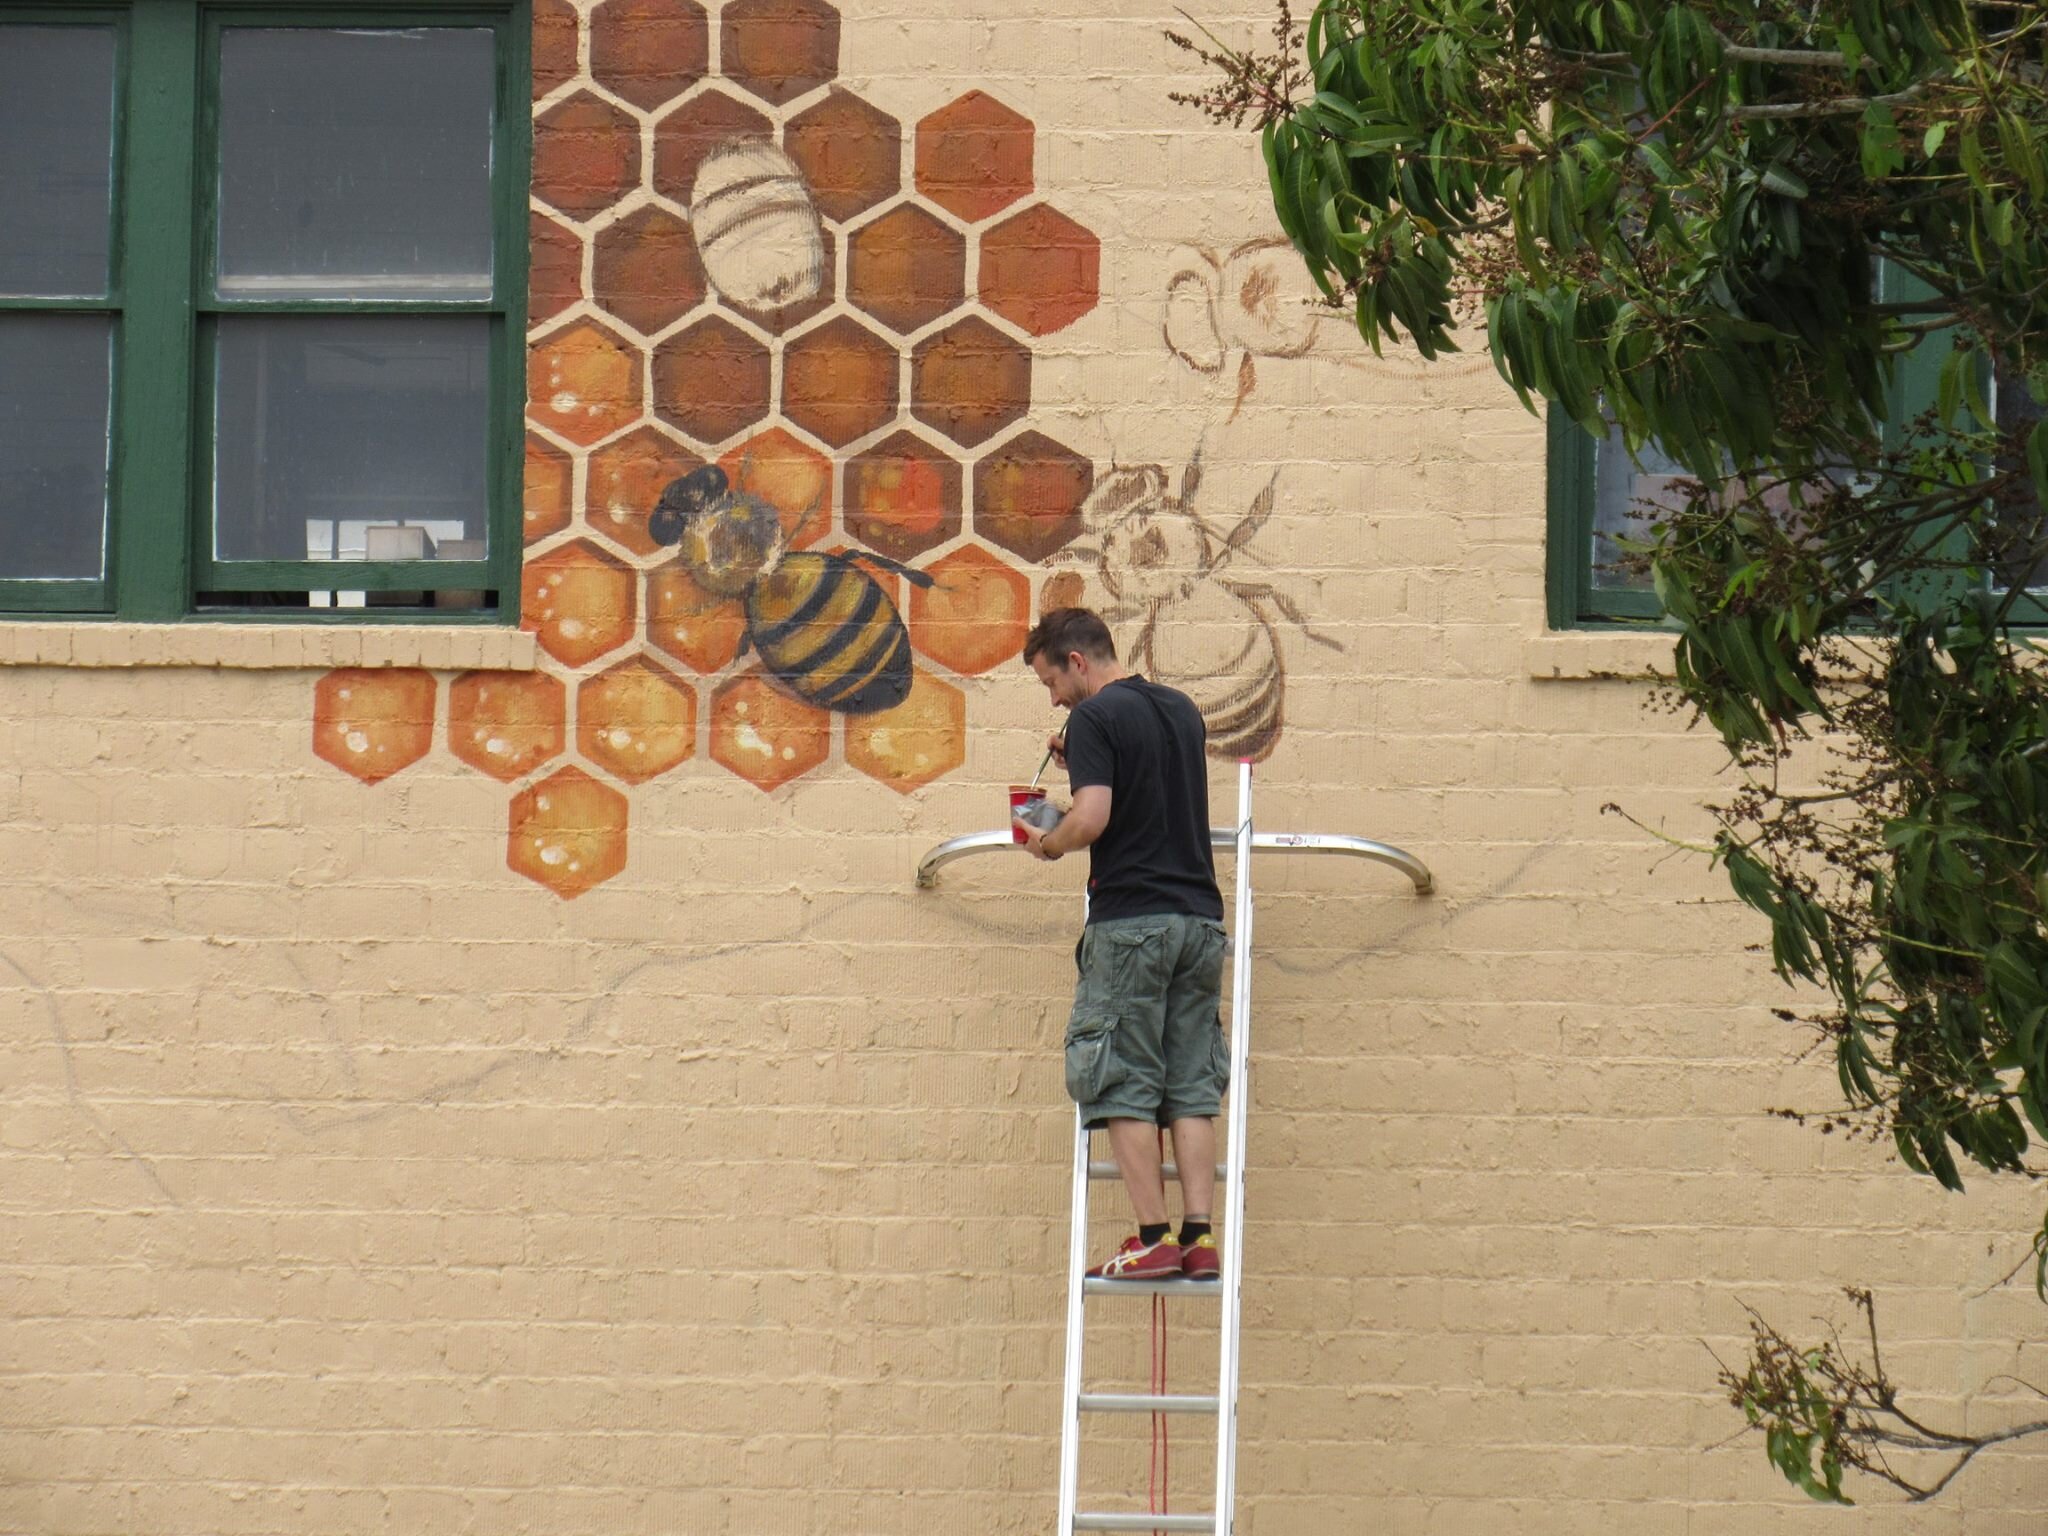 Matt Willey standing on a ladder painting a section of the mural